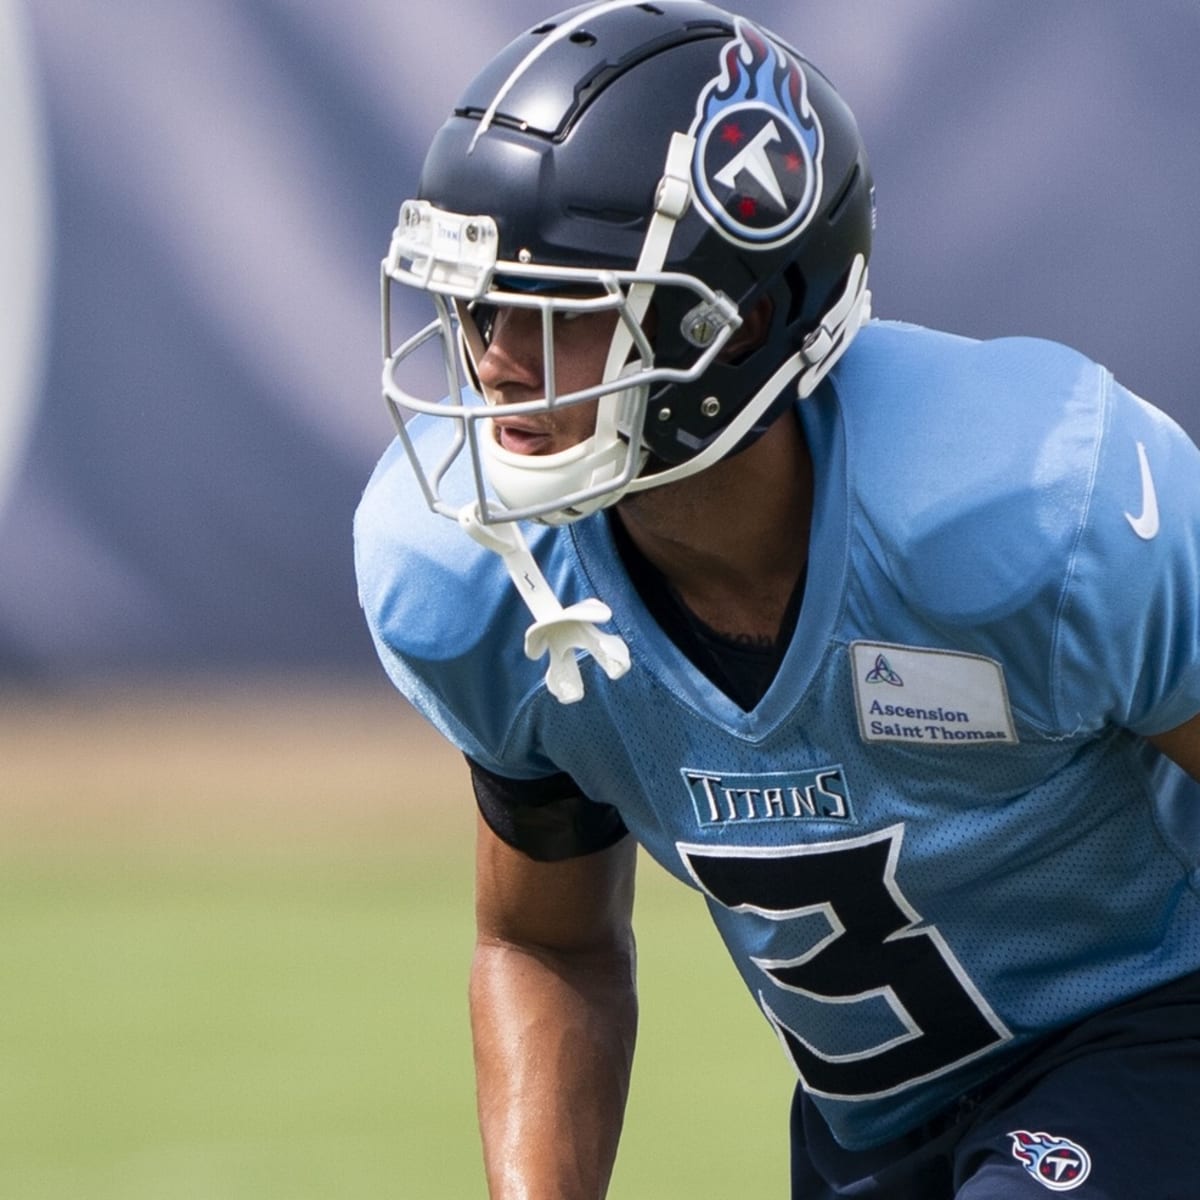 Tennessee Titans' Caleb Farley 'not happy' with lack of playing time